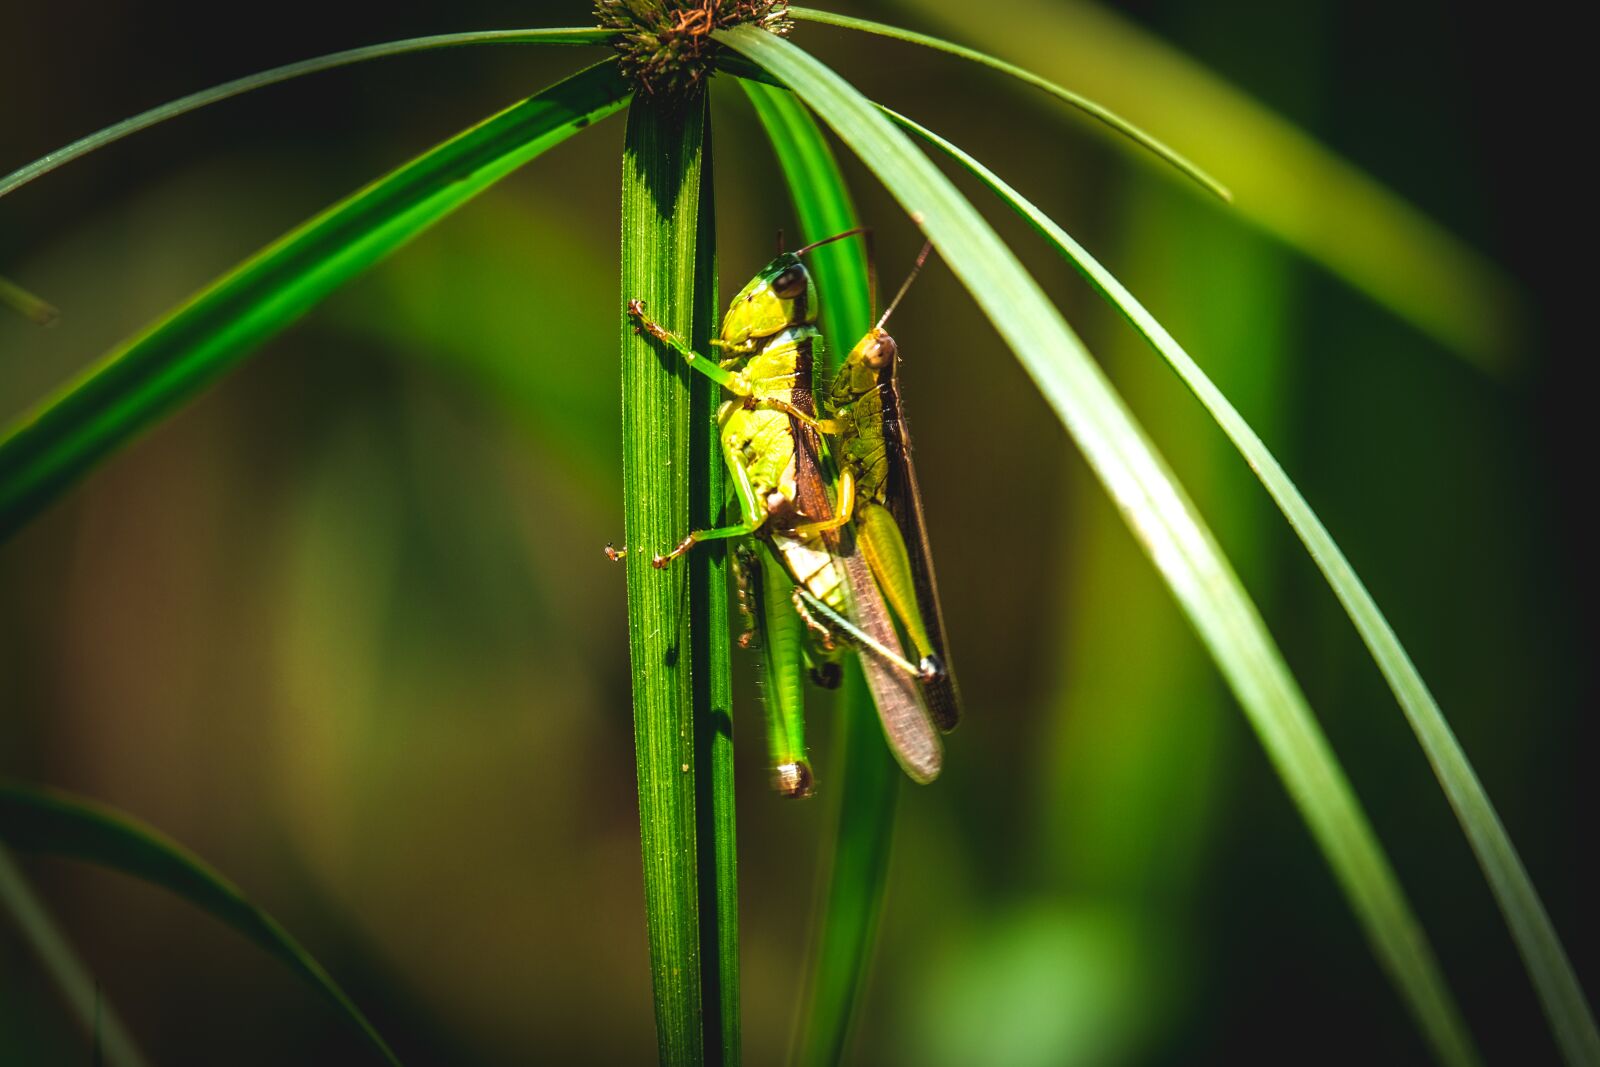 Fujifilm X-T20 sample photo. Locusts, insect, nature photography